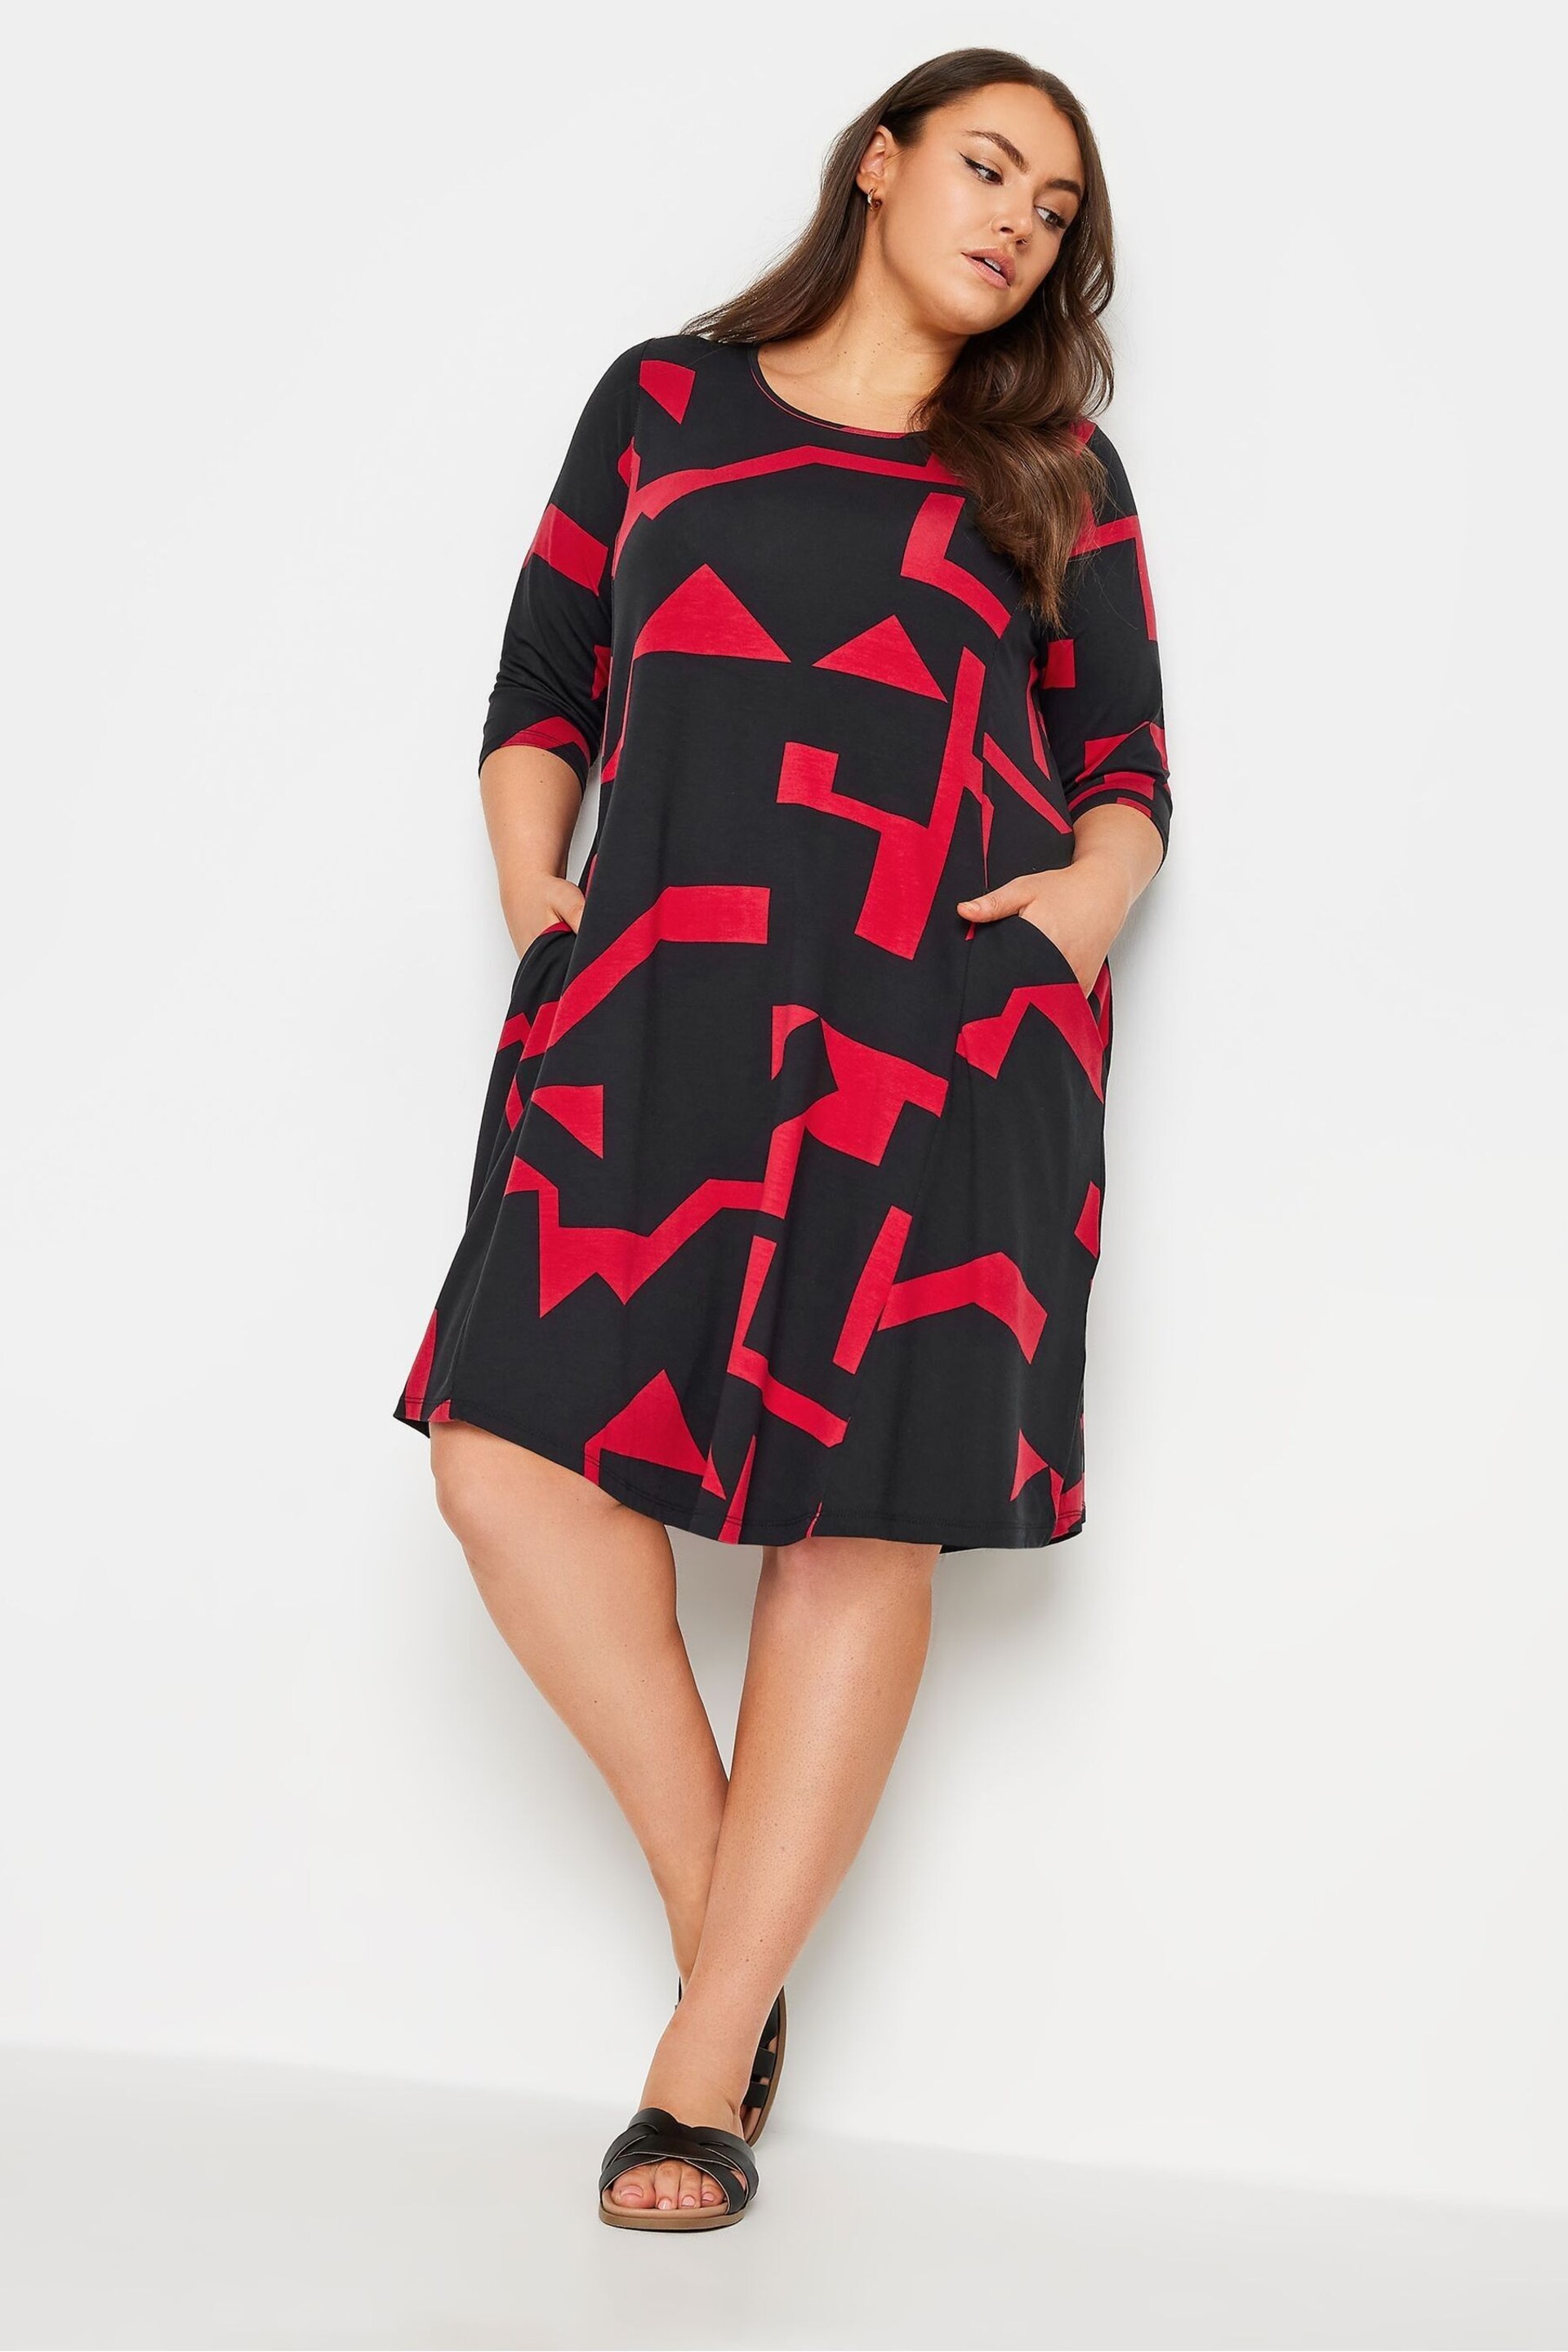 Yours Curve Black Abstract Print Pocket Dress - Image 2 of 5